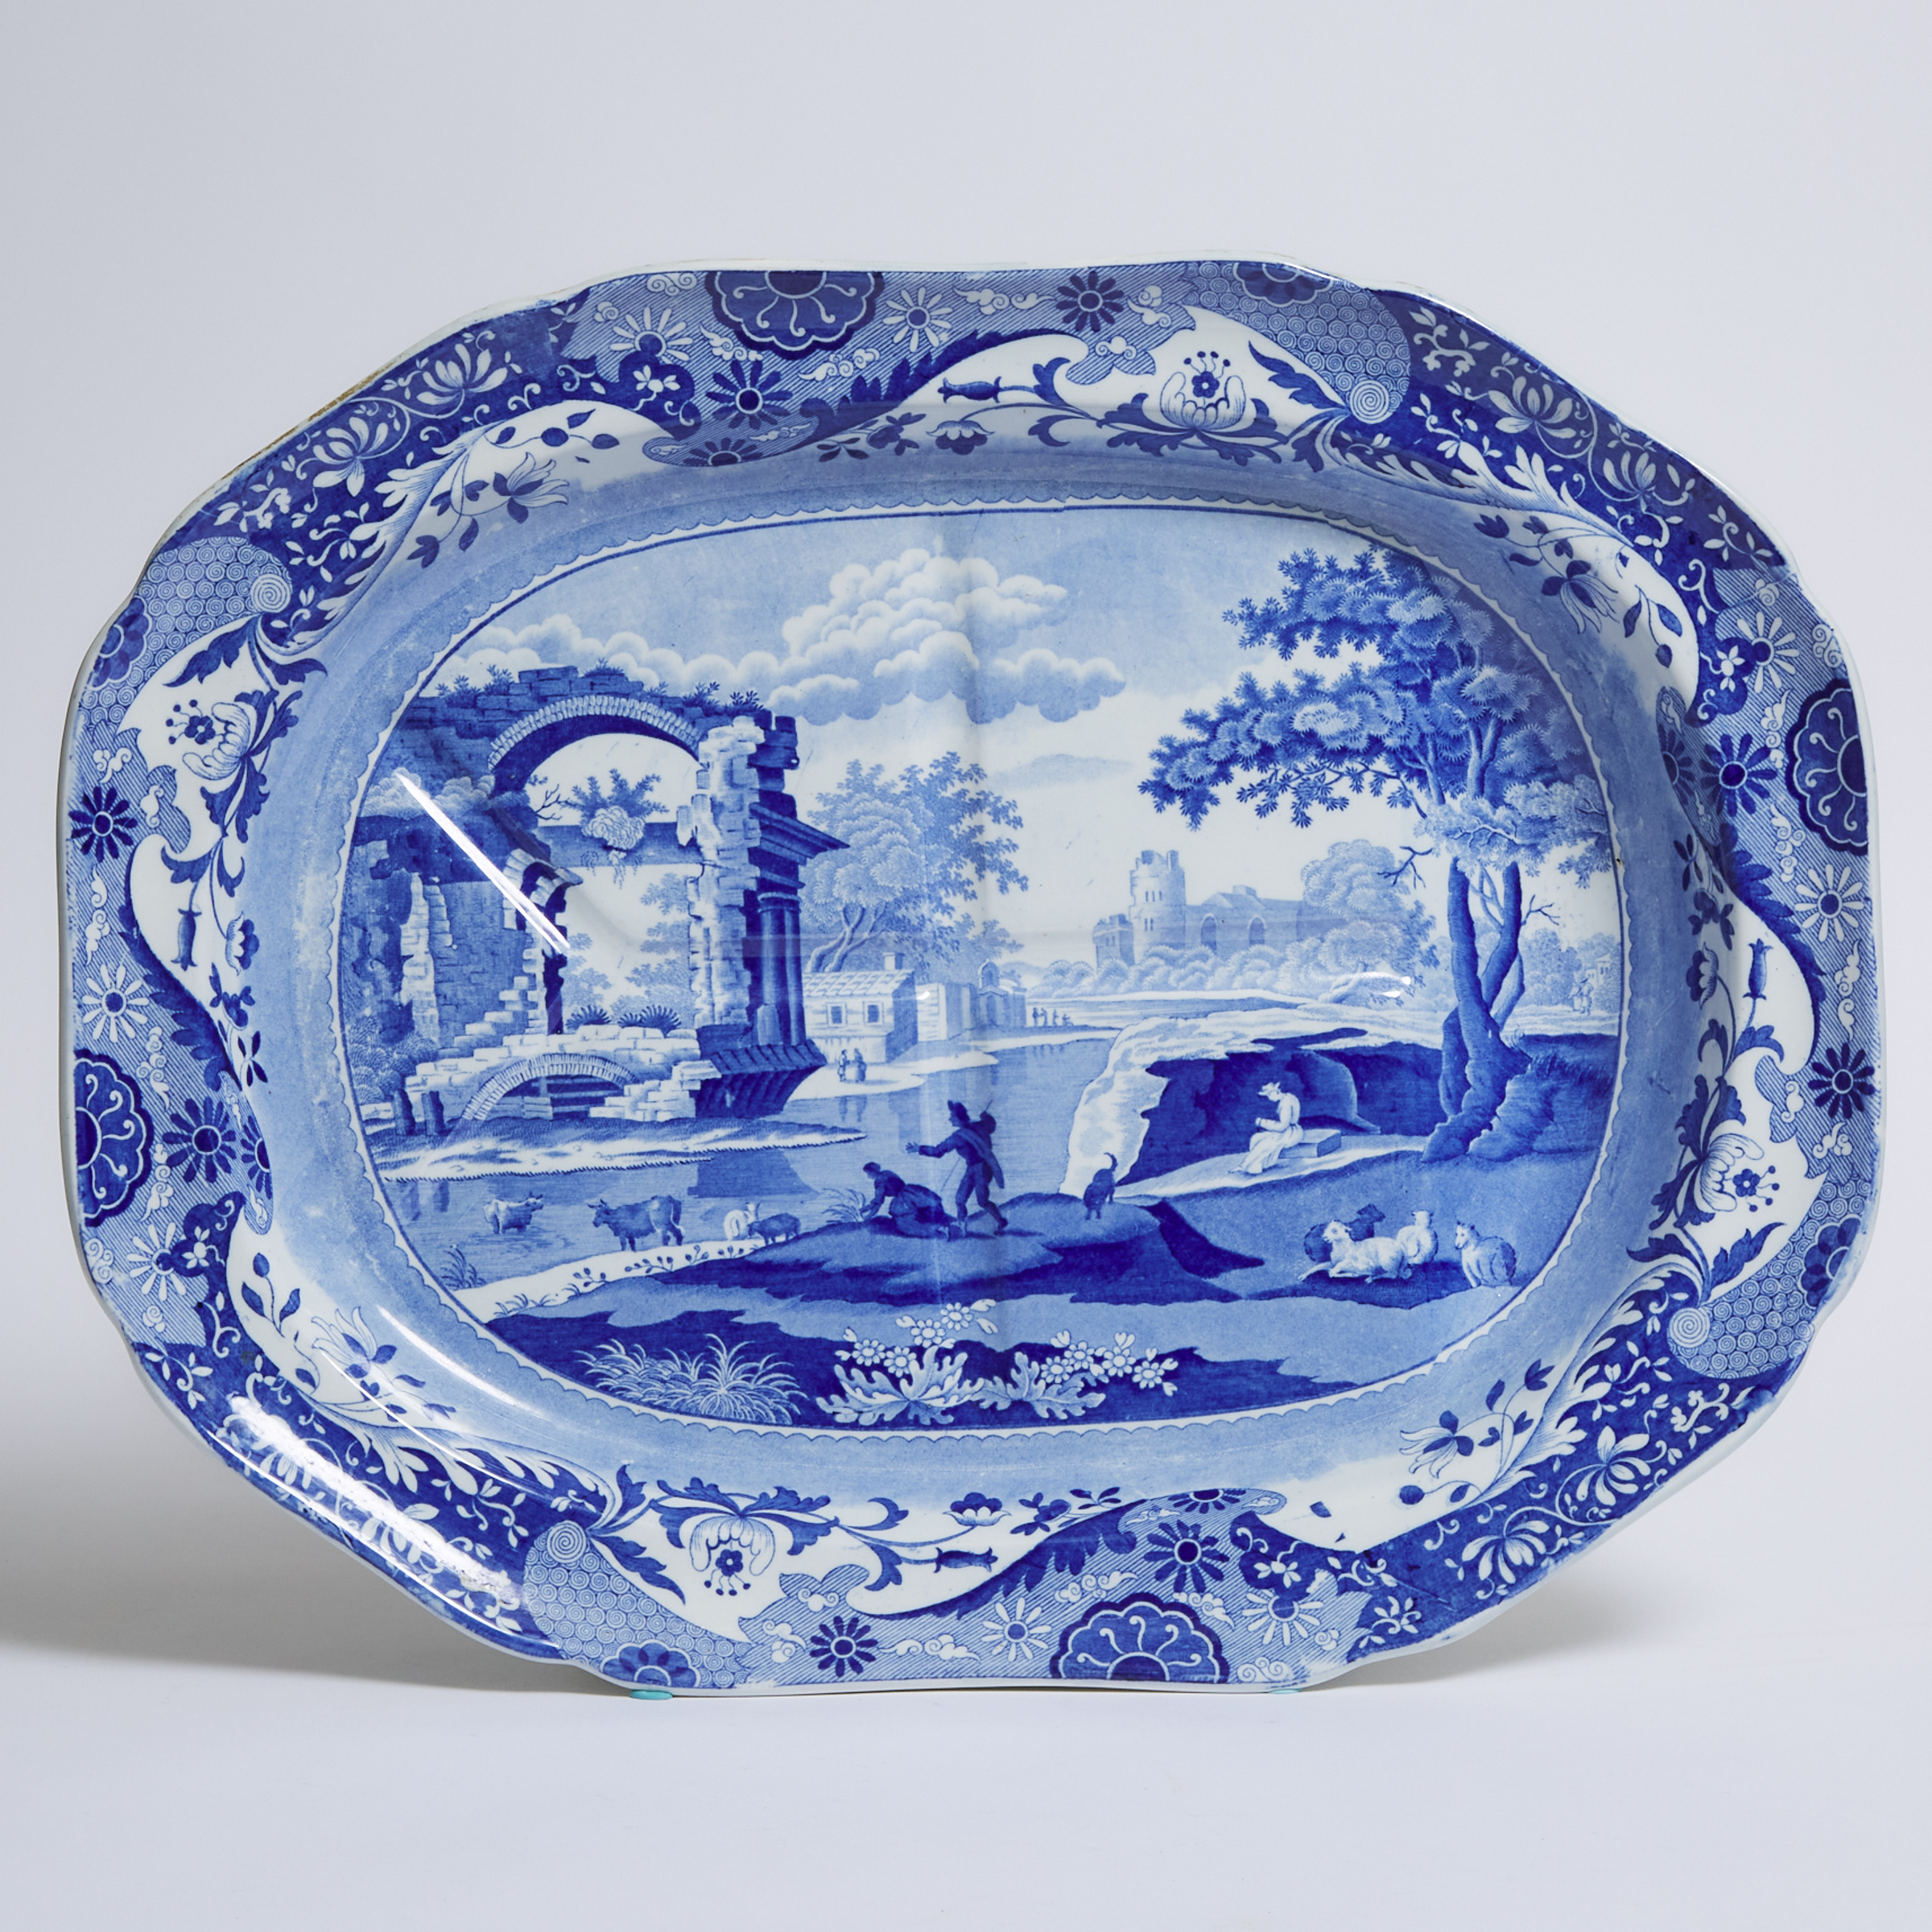 Spode Blue-Printed ‘Italian’ Well-and-Tree Platter, c.1825